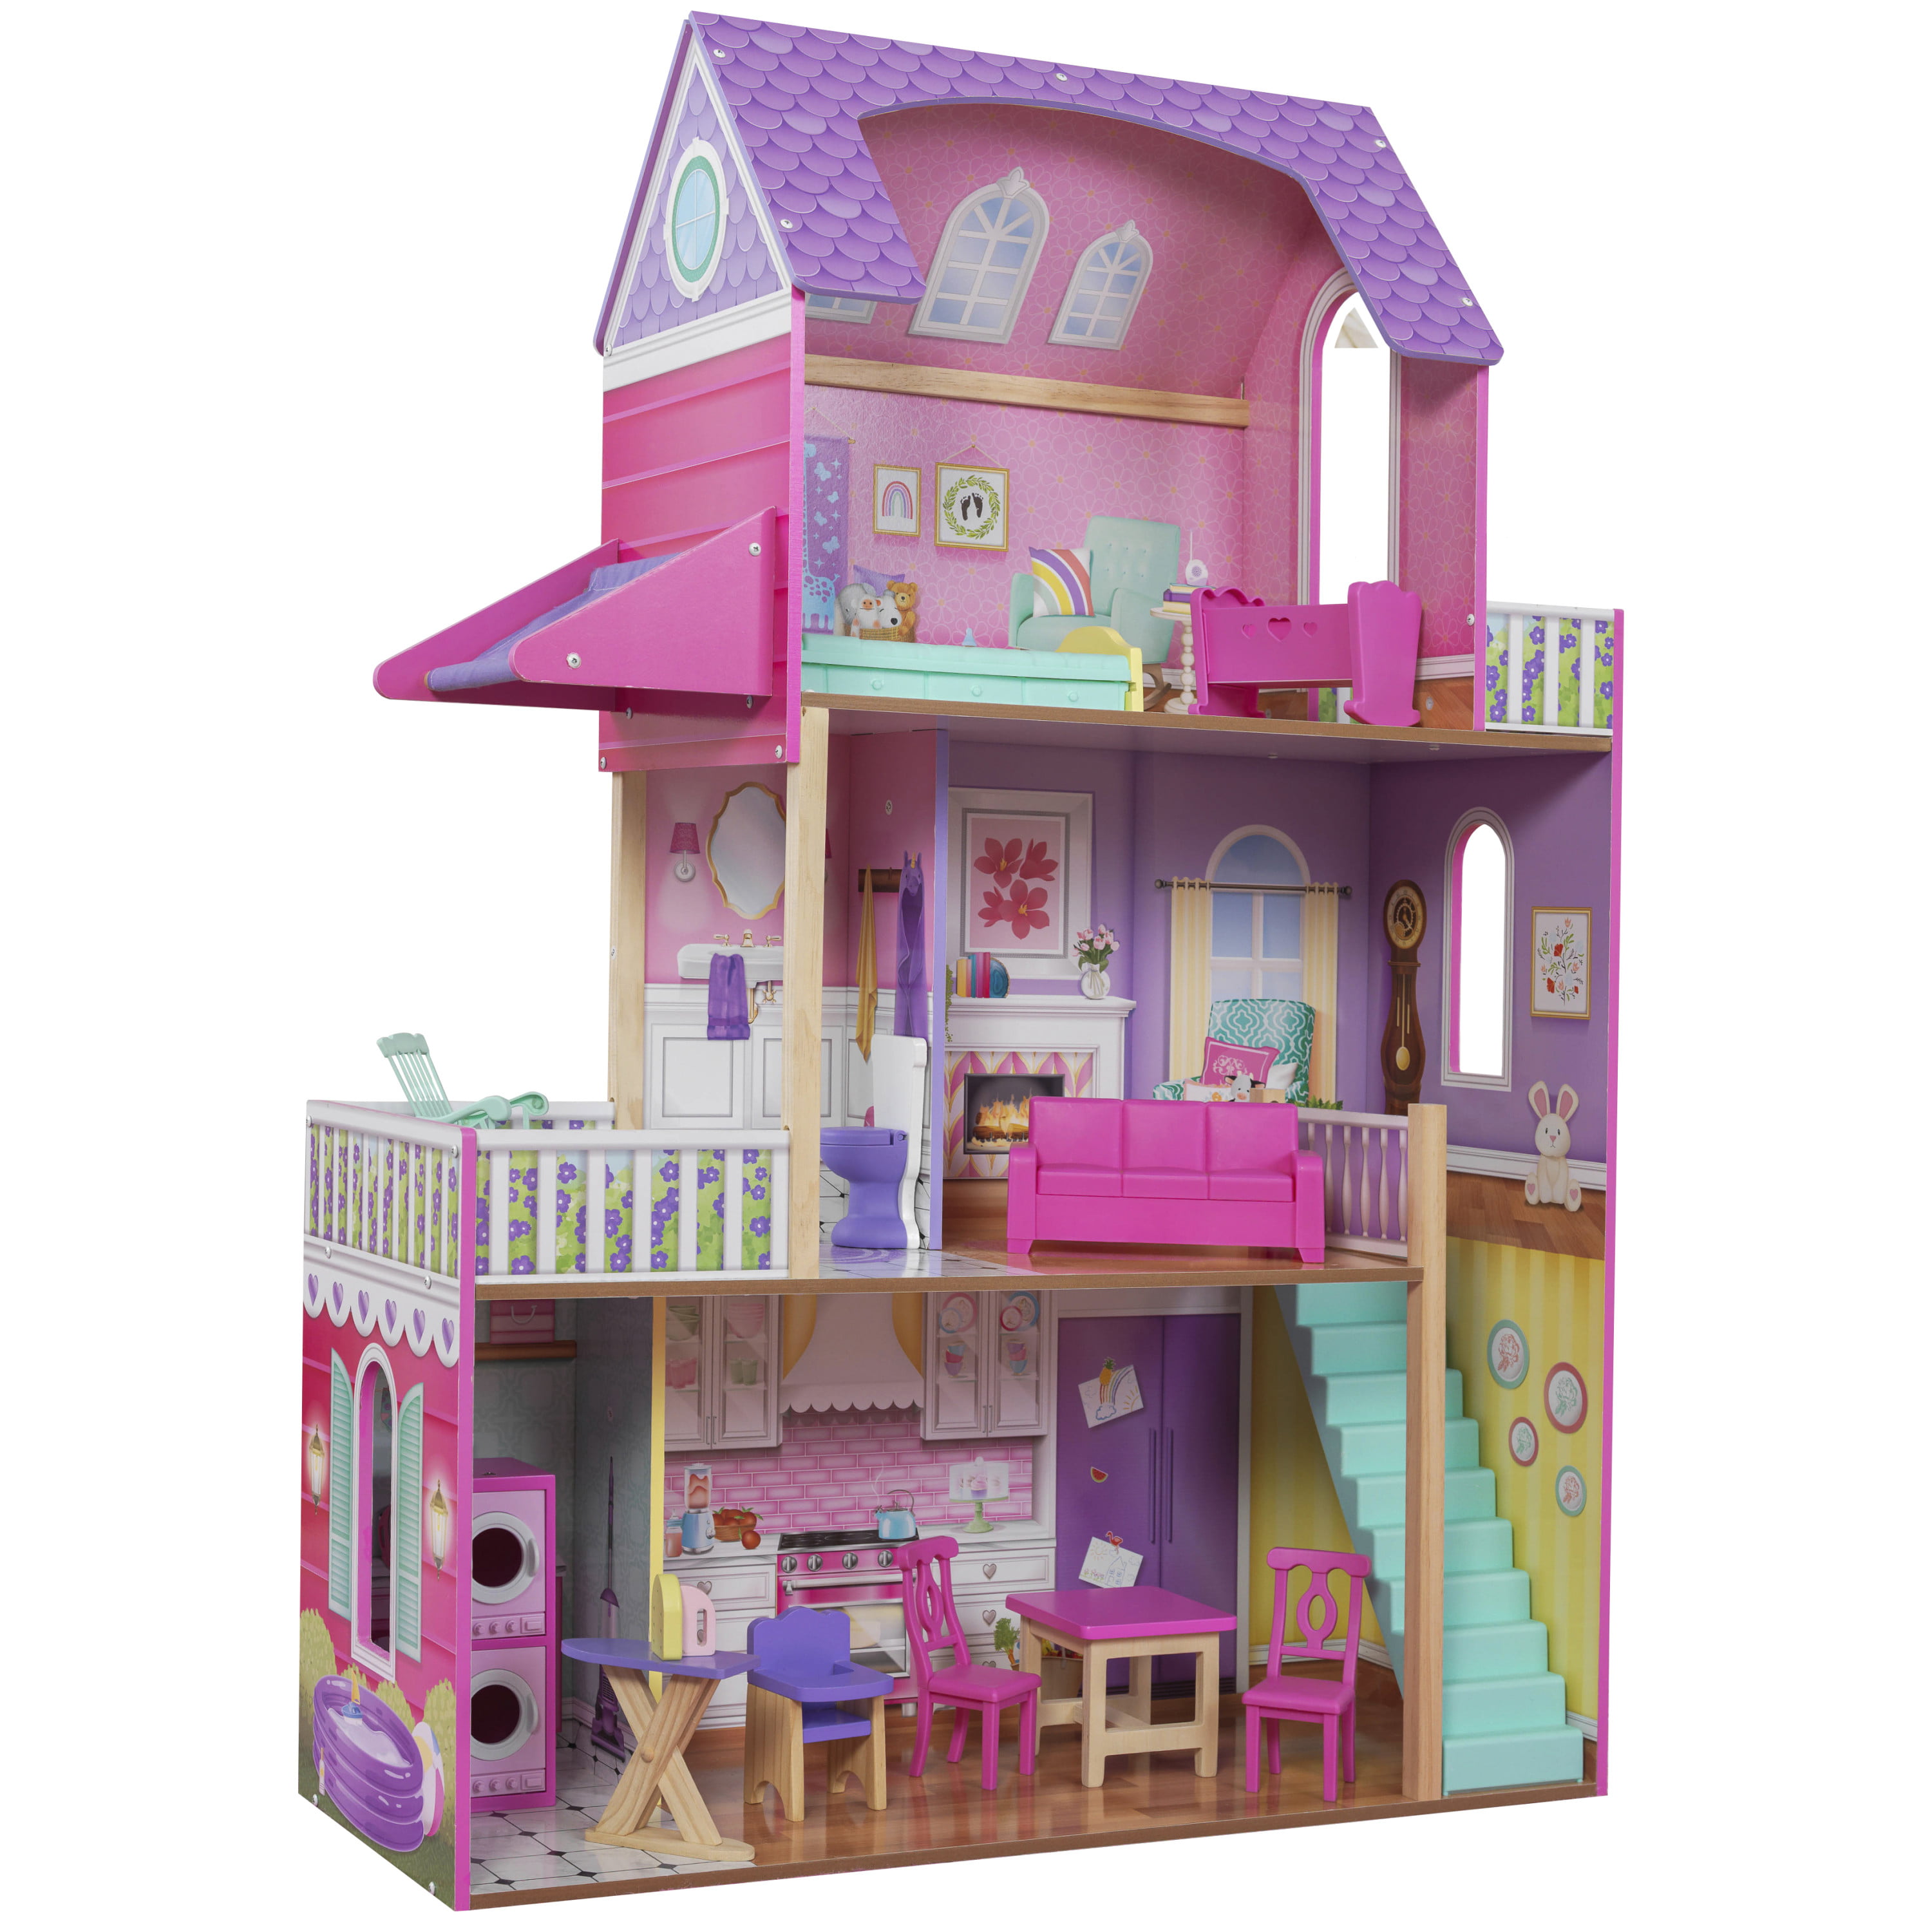 2 BLUE DOORS REPLACEMENT Fisher Price Loving Family Dream Dollhouse 